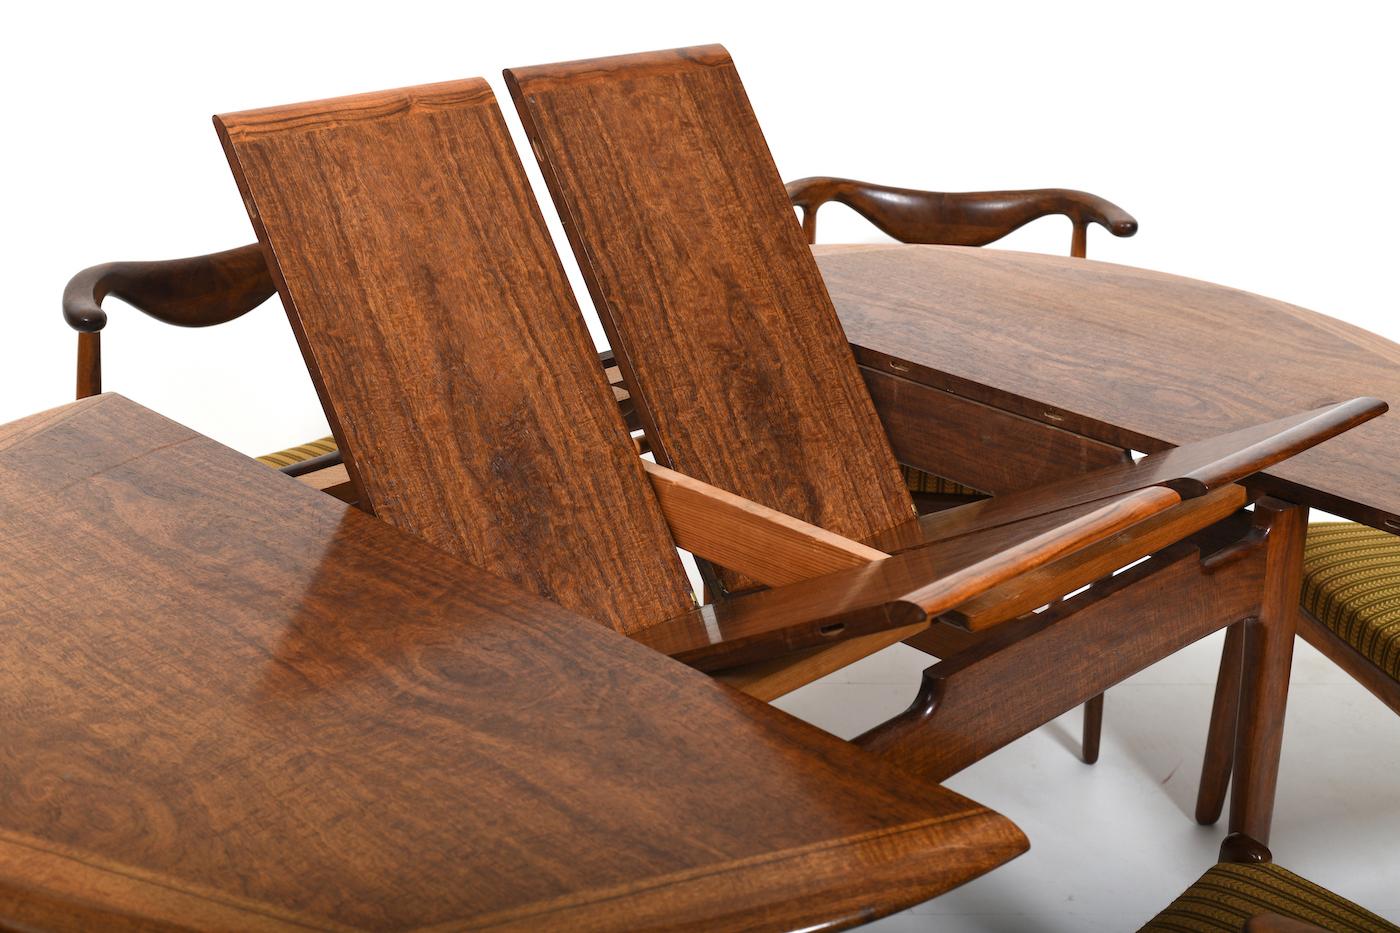 Danish Rare Dining Room Set / Cowhorn Chairs, Table and Cabinet by Svend Aage Madsen For Sale